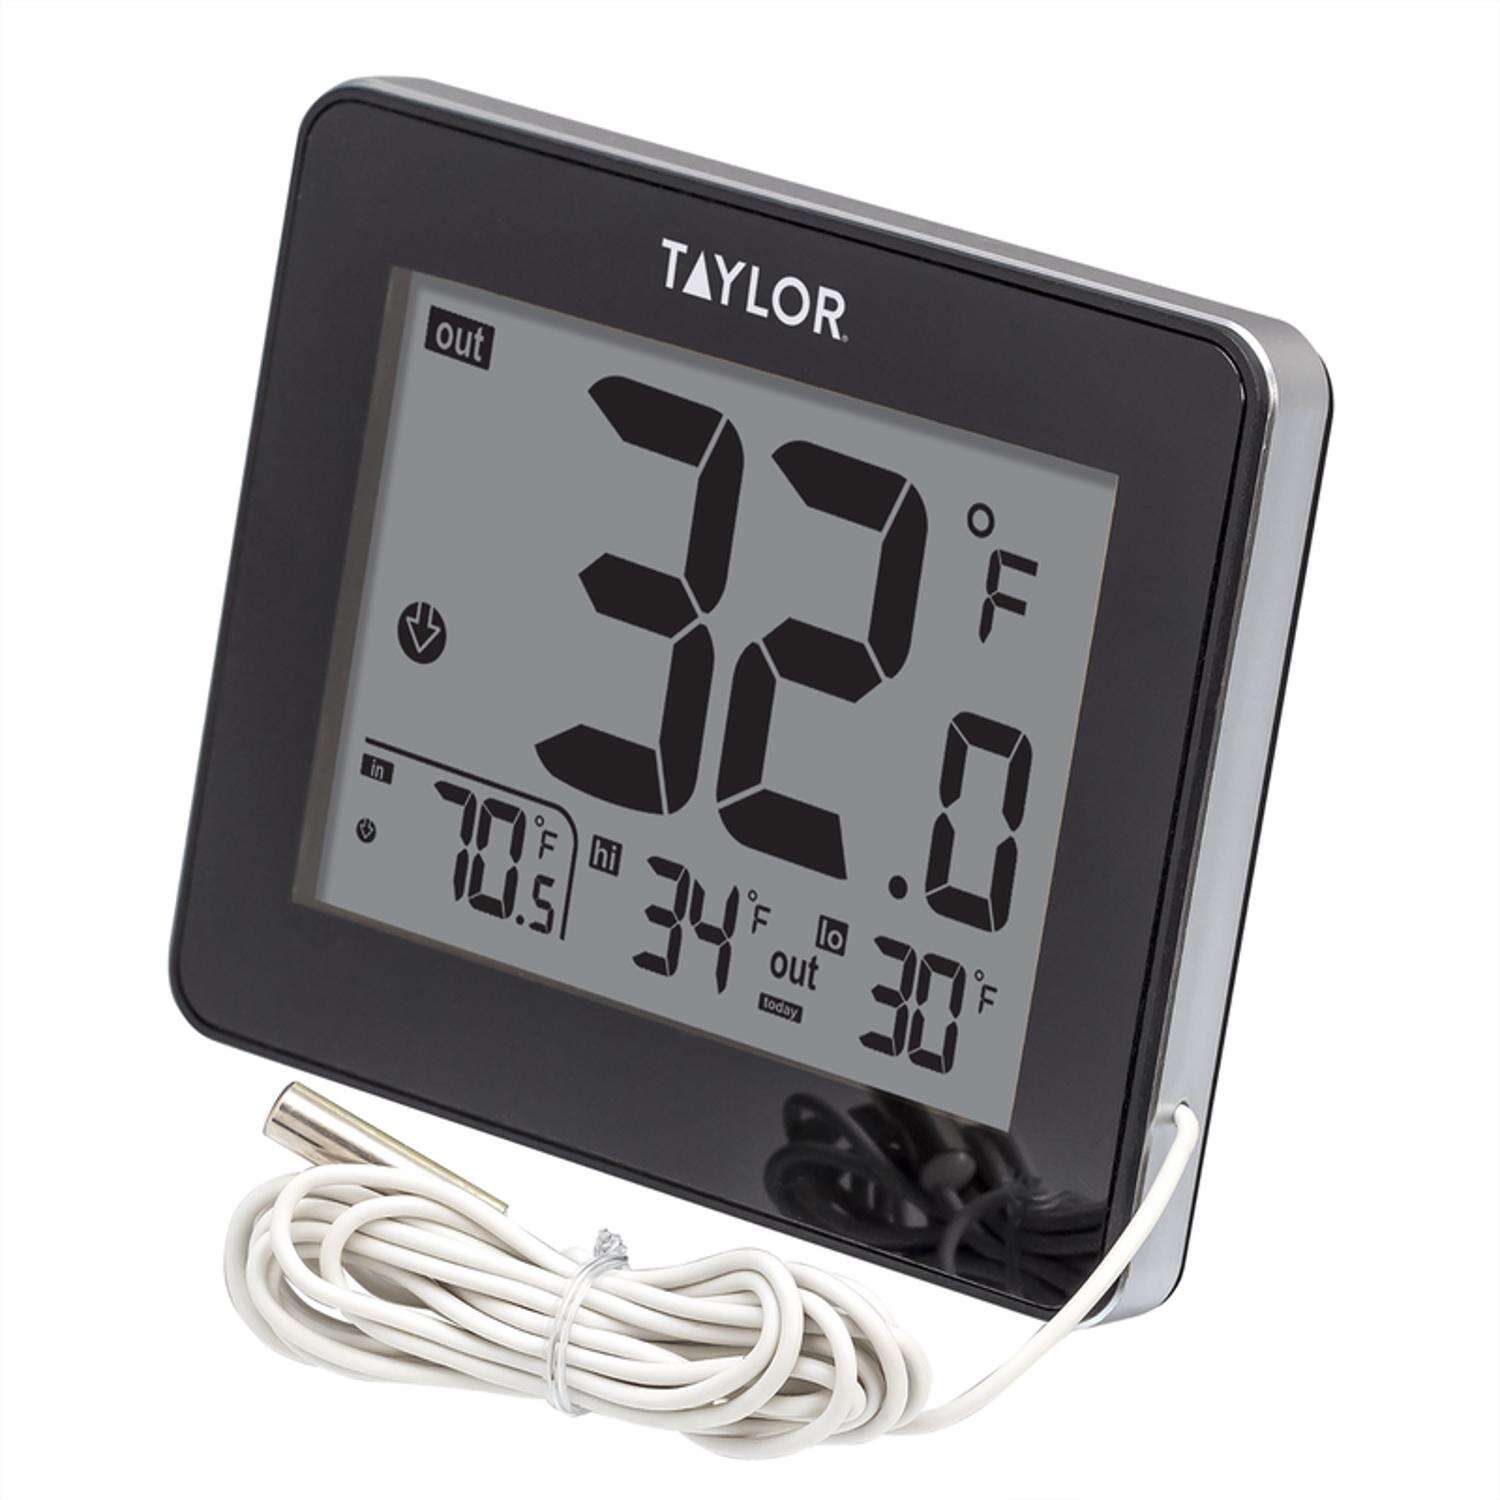 Digital LCD Thermometers Temperature Meter Accessory Gauge C/F PC MOD Hot Sale 